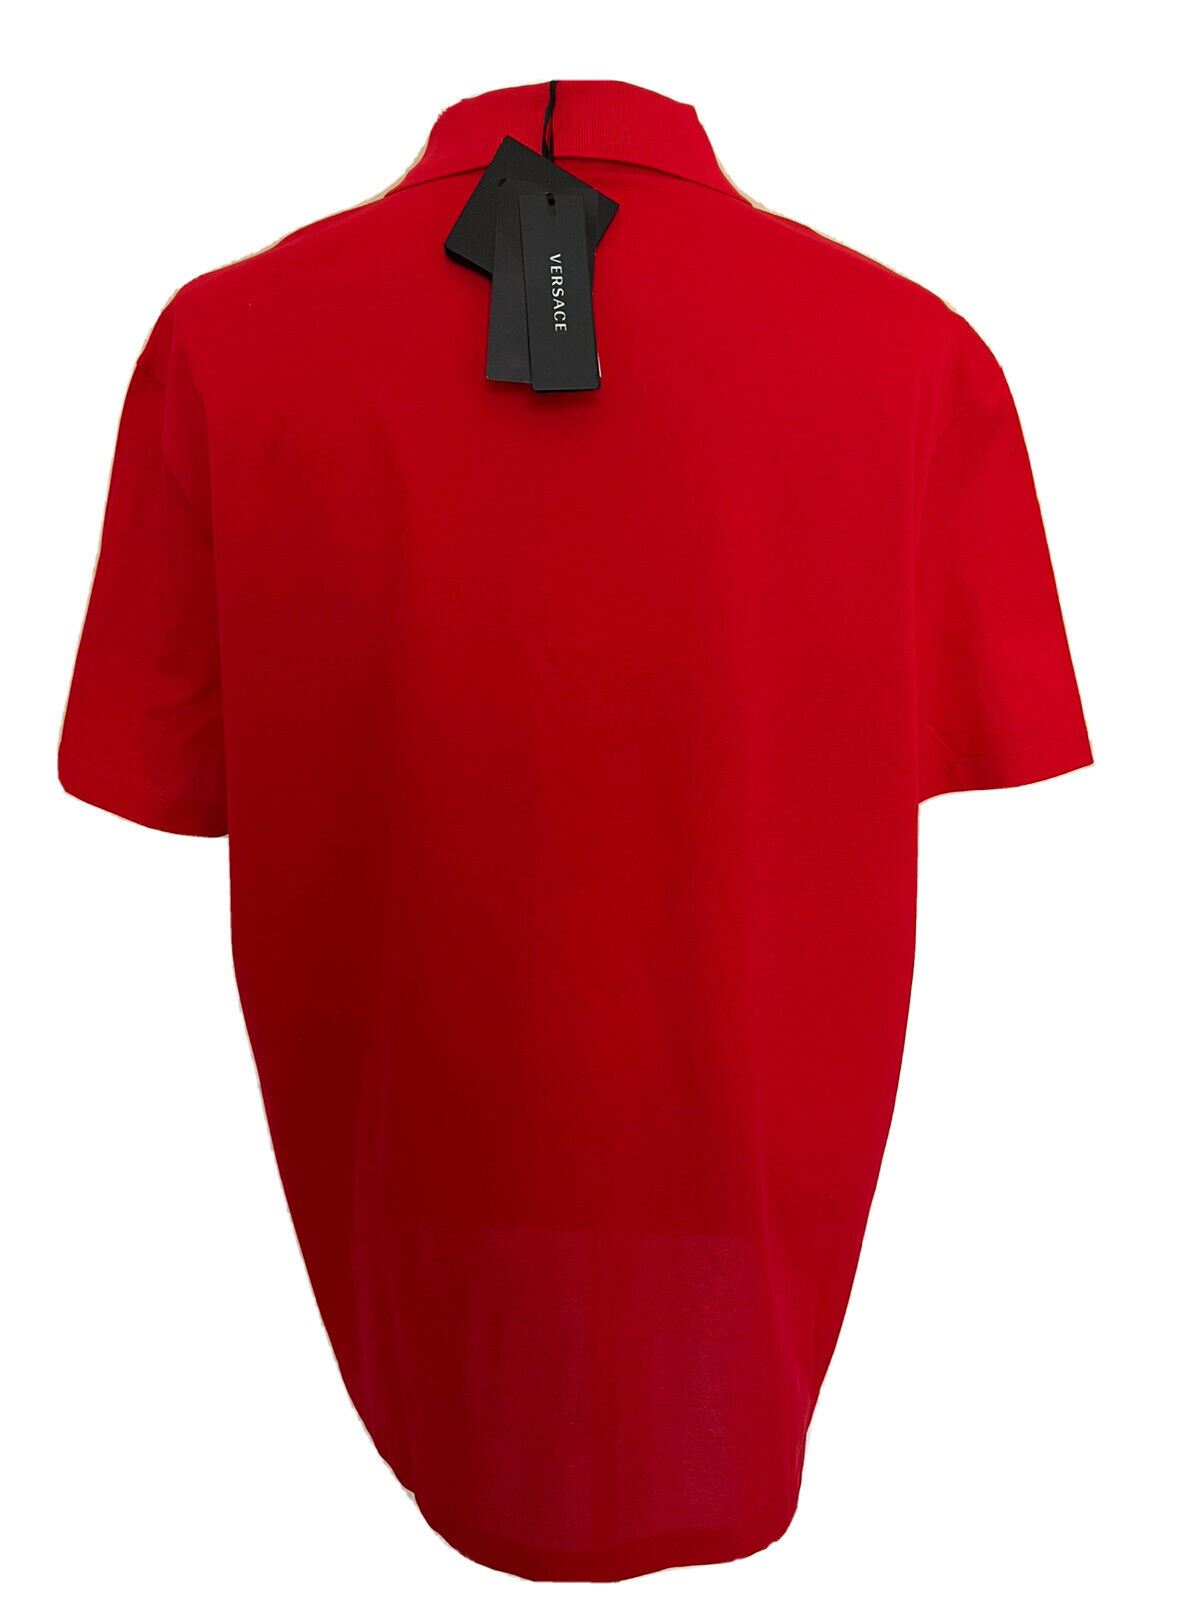 NWT $425 Versace Medusa Red Tailor Fit Cotton Polo Shirt 5XL A87427 Italy